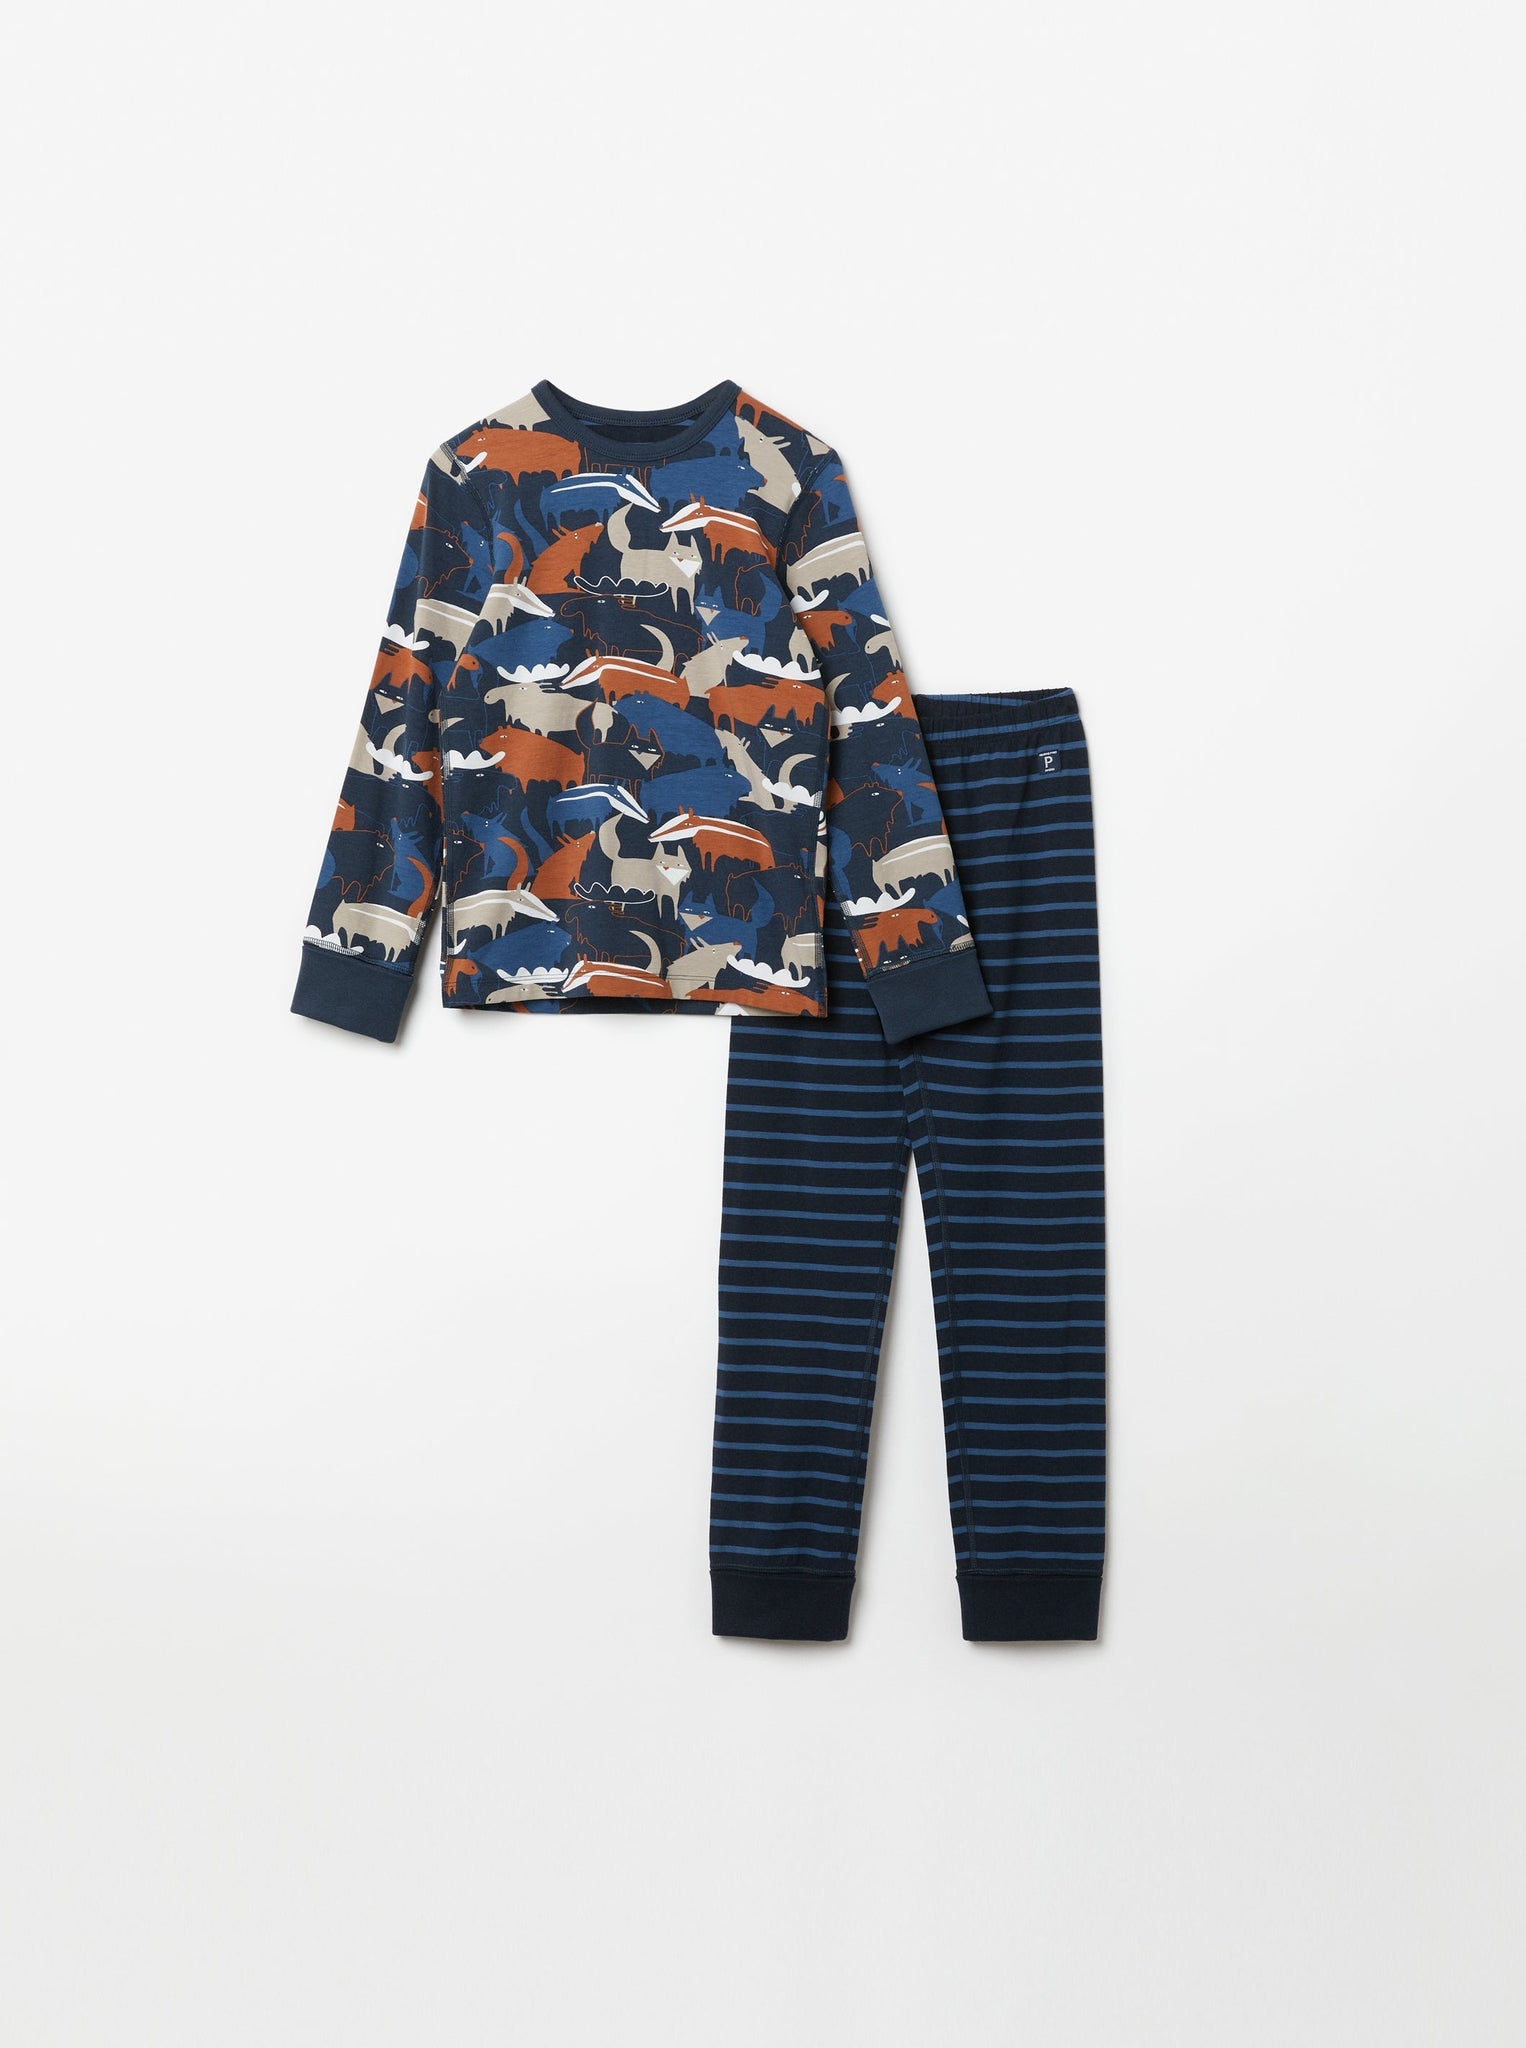 Nordic Animal Print Kids Pyjamas from the Polarn O. Pyret kidswear collection. Ethically produced kids clothing.